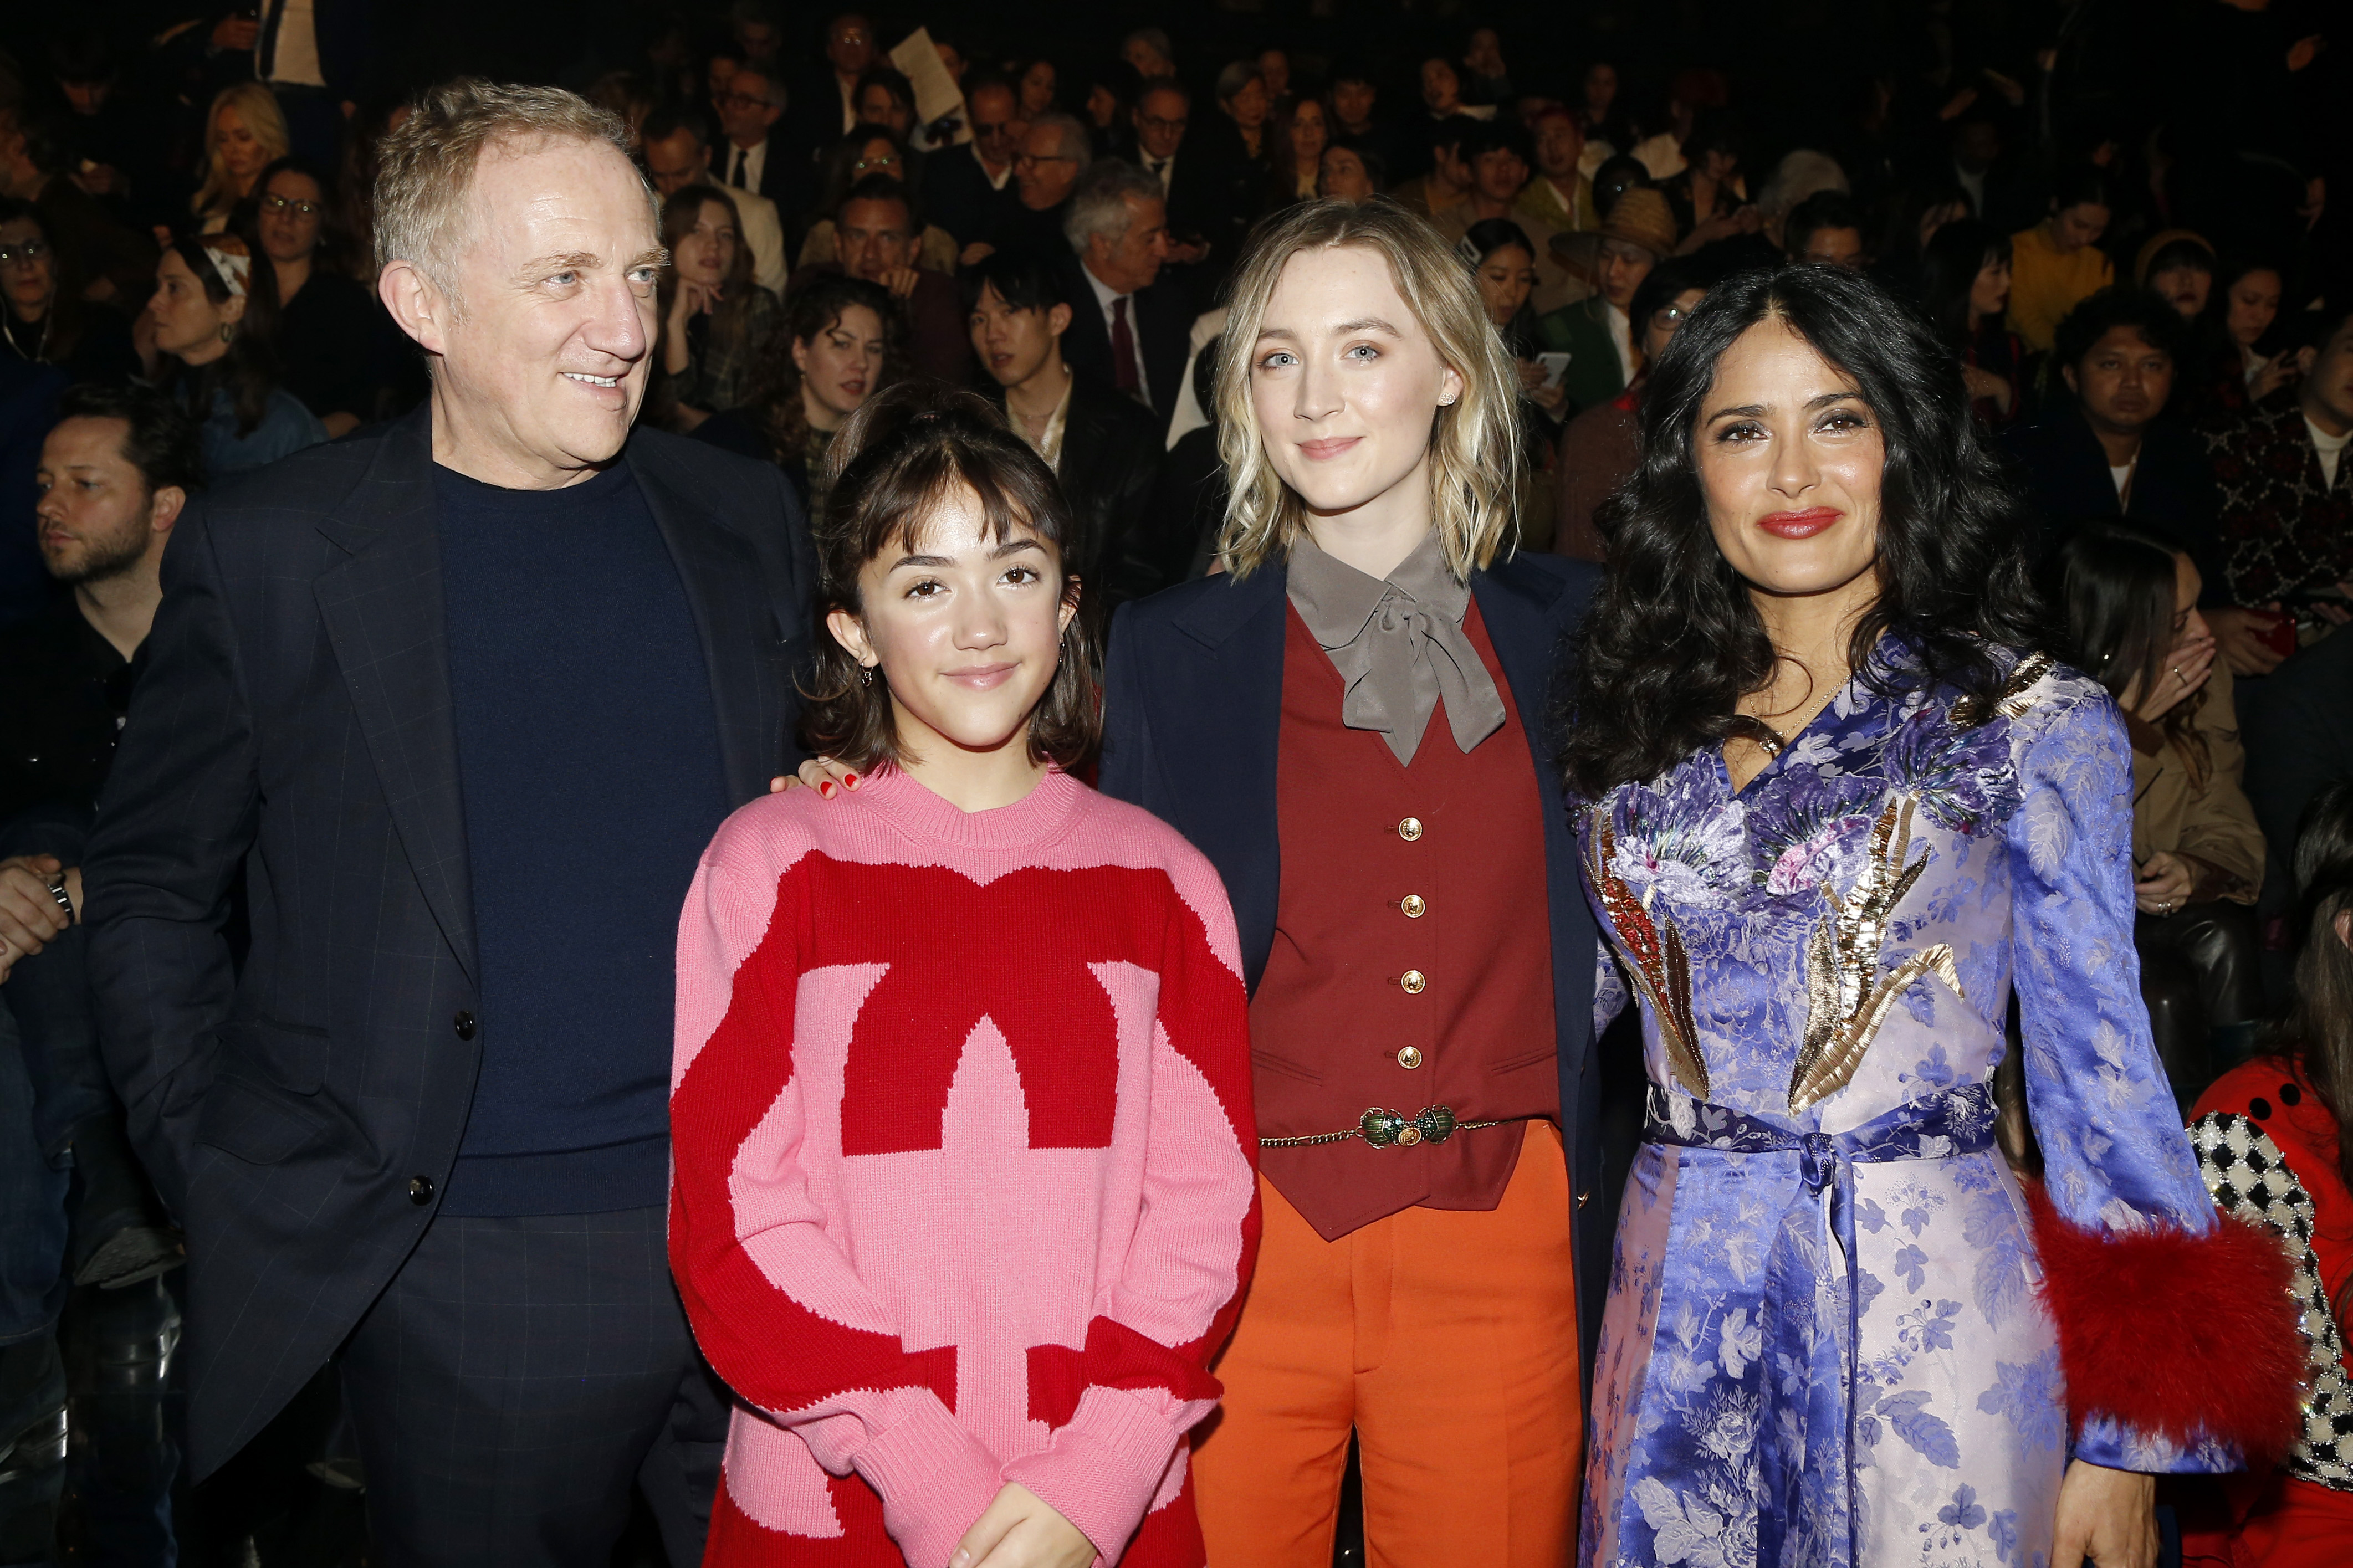 Francois-Henri Pinault, Valentina Paloma Pinault, Saoirse Ronan and Salma Hayek  attend the Gucci show during the Milan Fashion Week on 20 Feb 2019 in Milan, Italy | Source: Getty Images